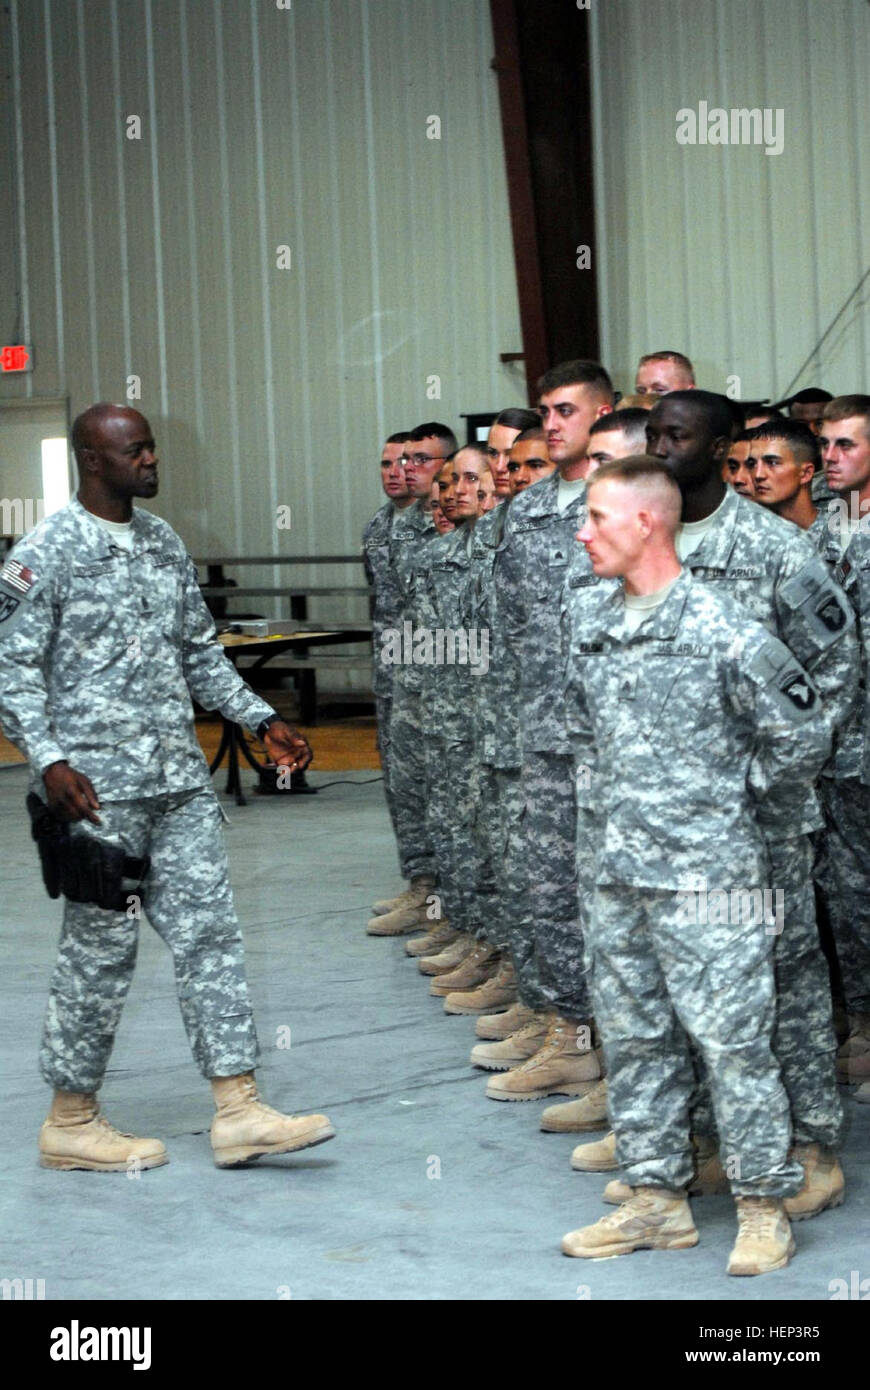 Command Sgt. Maj. Bernard McPherson, native of Orangeburg, S.C., and command sergeant major of the 18th Military Police Brigade addresses 74 newly inducted non-commissioned officer s of the 716th Military Police Battalion, 18th MP Bde., Multi-National Division-Baghdad, into the Corps of NCOs June 21 at Camp Liberty during an NCO induction Ceremony. The 716th MP Bn. is deployed from Fort Campbell, Ky. Maintaining the standard in Iraq 96056 Stock Photo